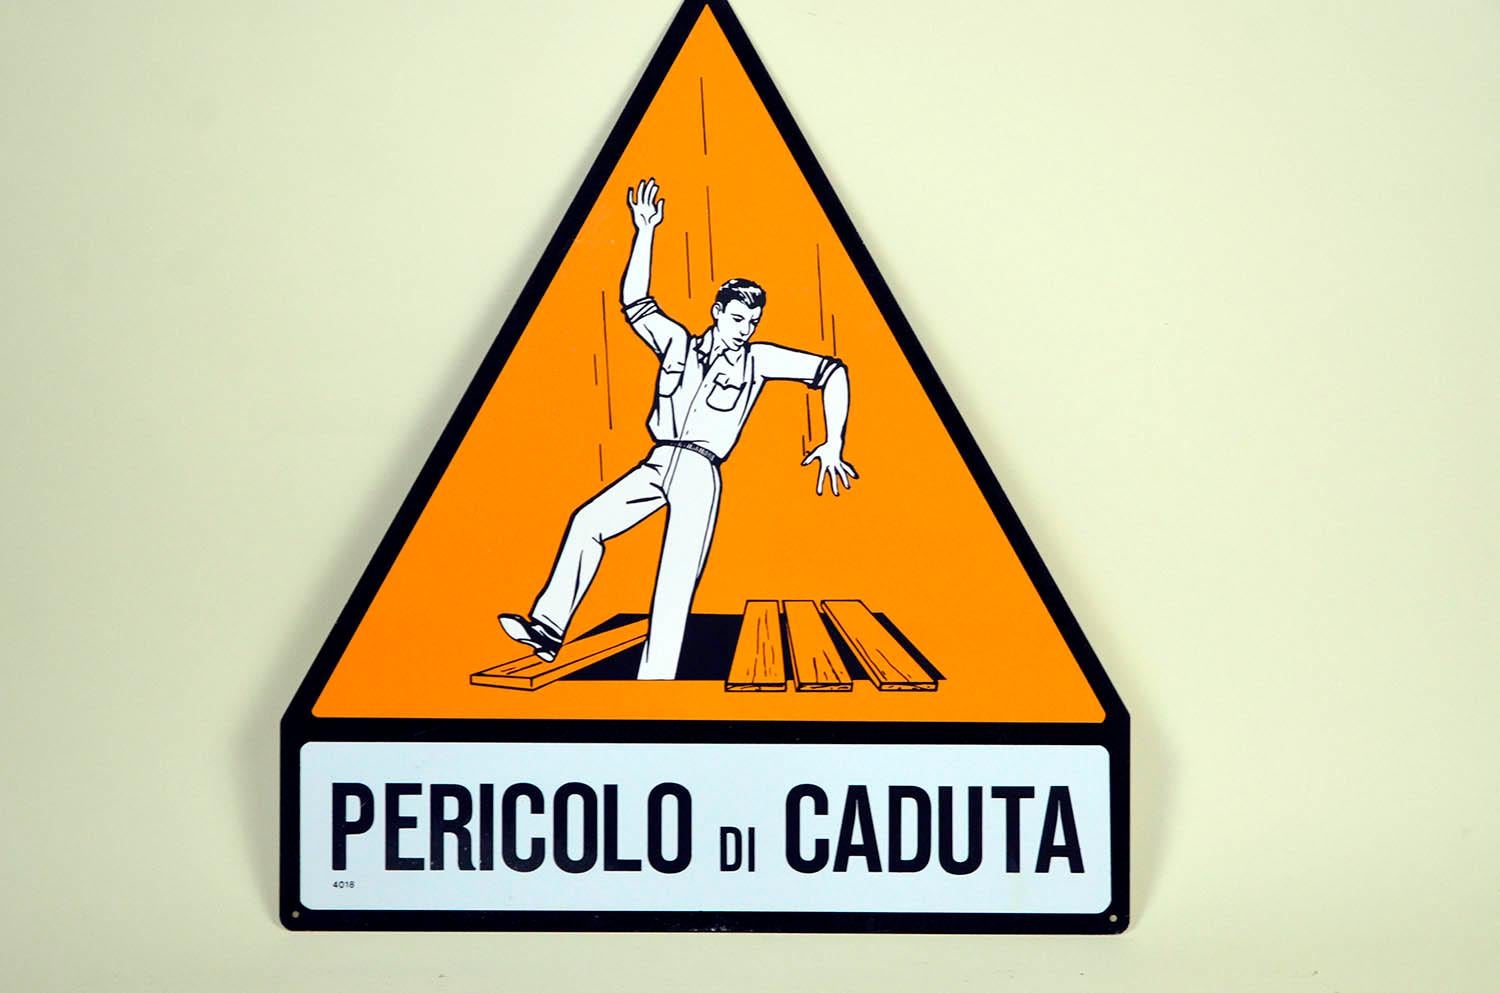 Orange, black and white triangle metal fall hazard ( pericolo di caduta ) safety sign.
This screen printing safety sign was produced in 1950s in Italy and it was in use within the Italian factories.